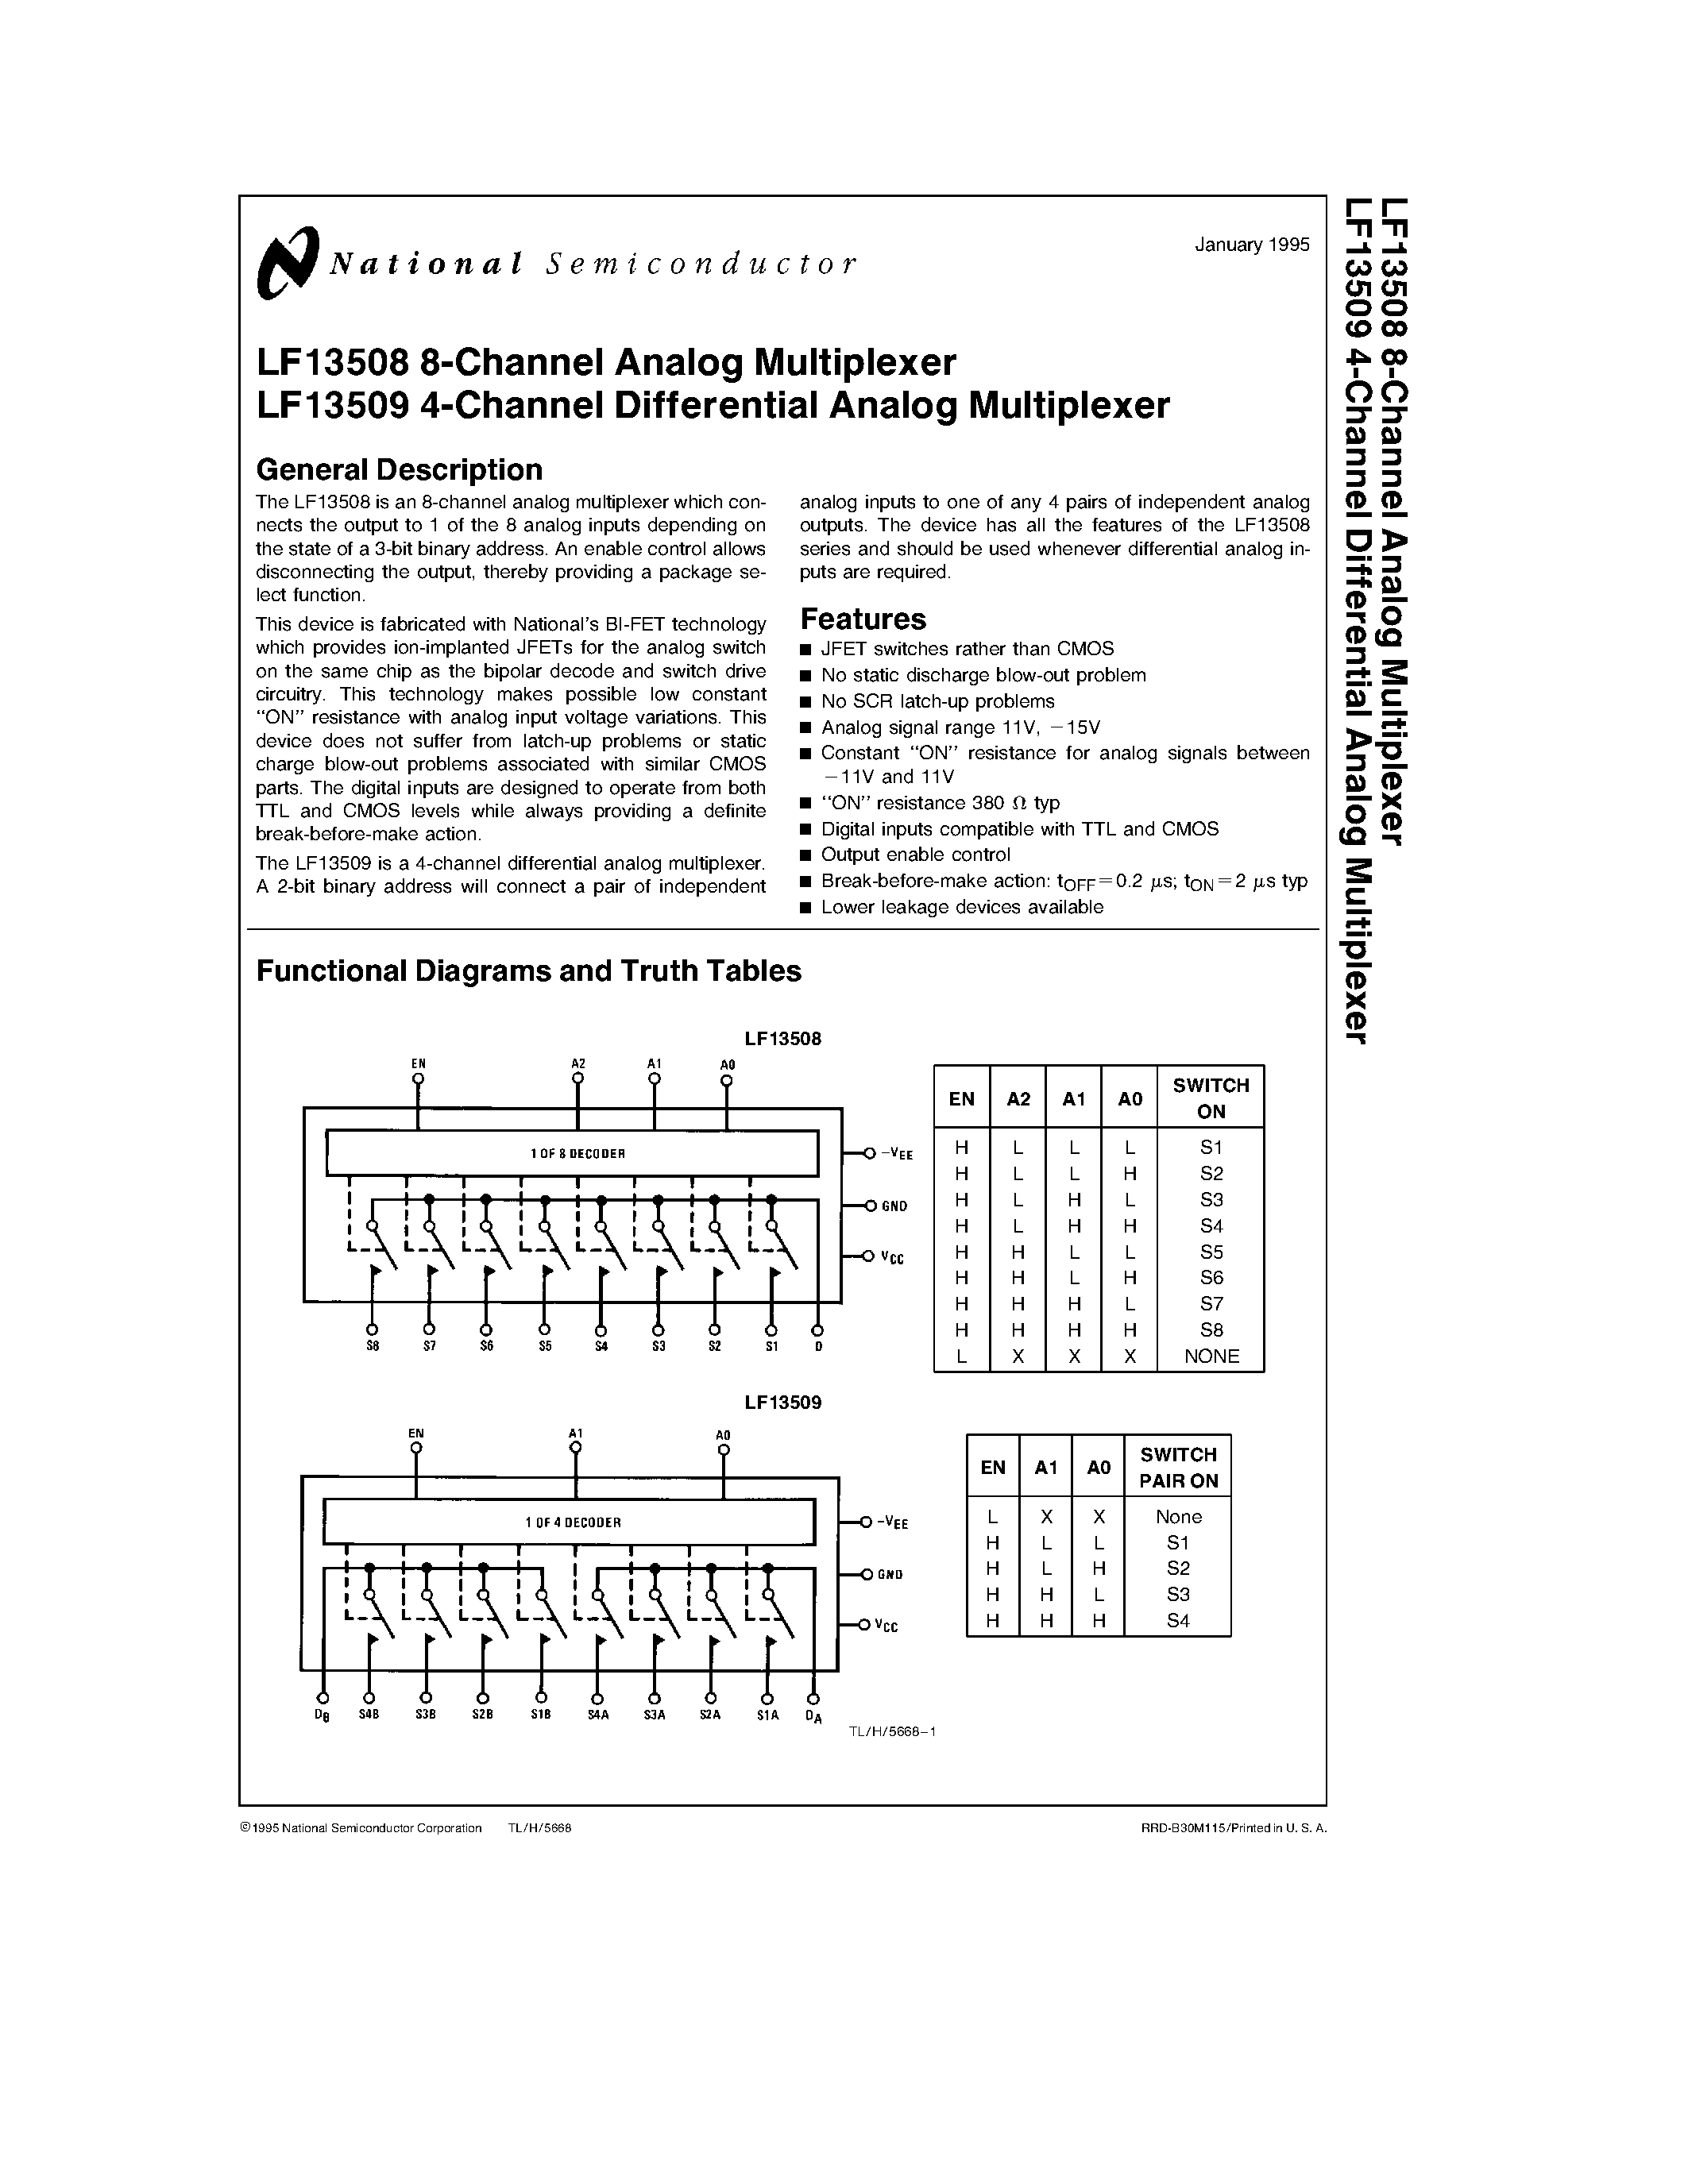 Даташит LF13508-(LF13508) 4-Channel Differential Analog Multiplexer страница 1